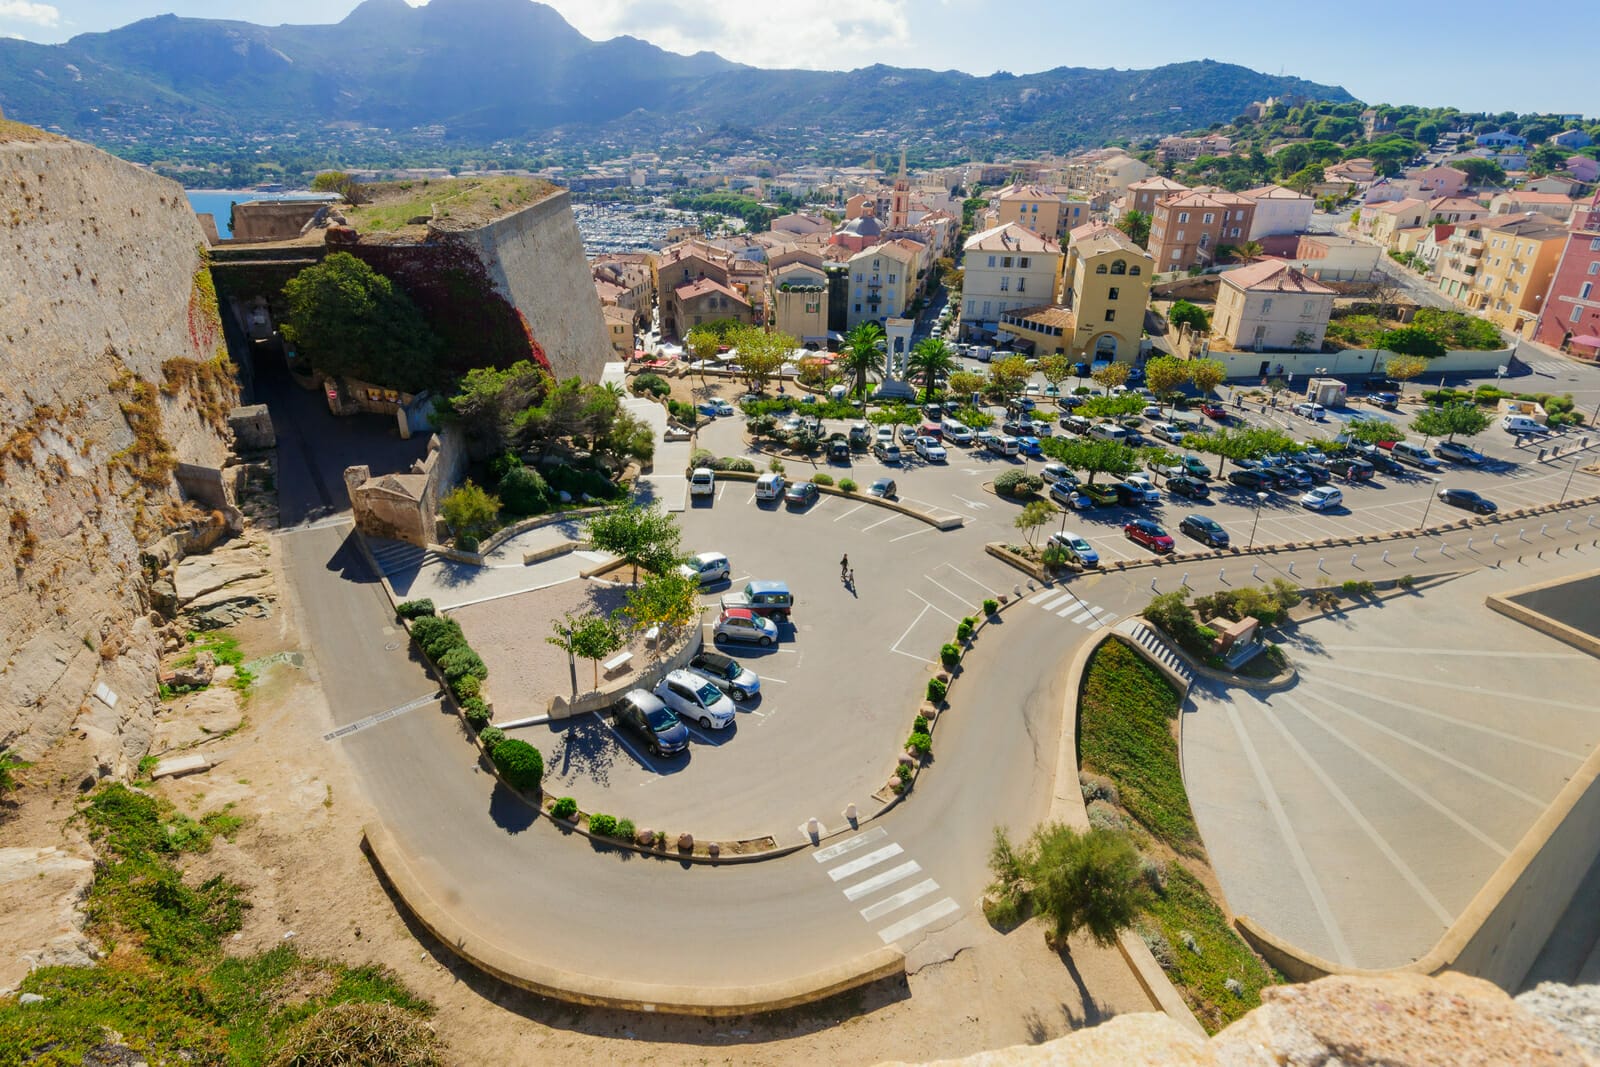 You are currently viewing Visiter les sites et monuments phares de Calvi